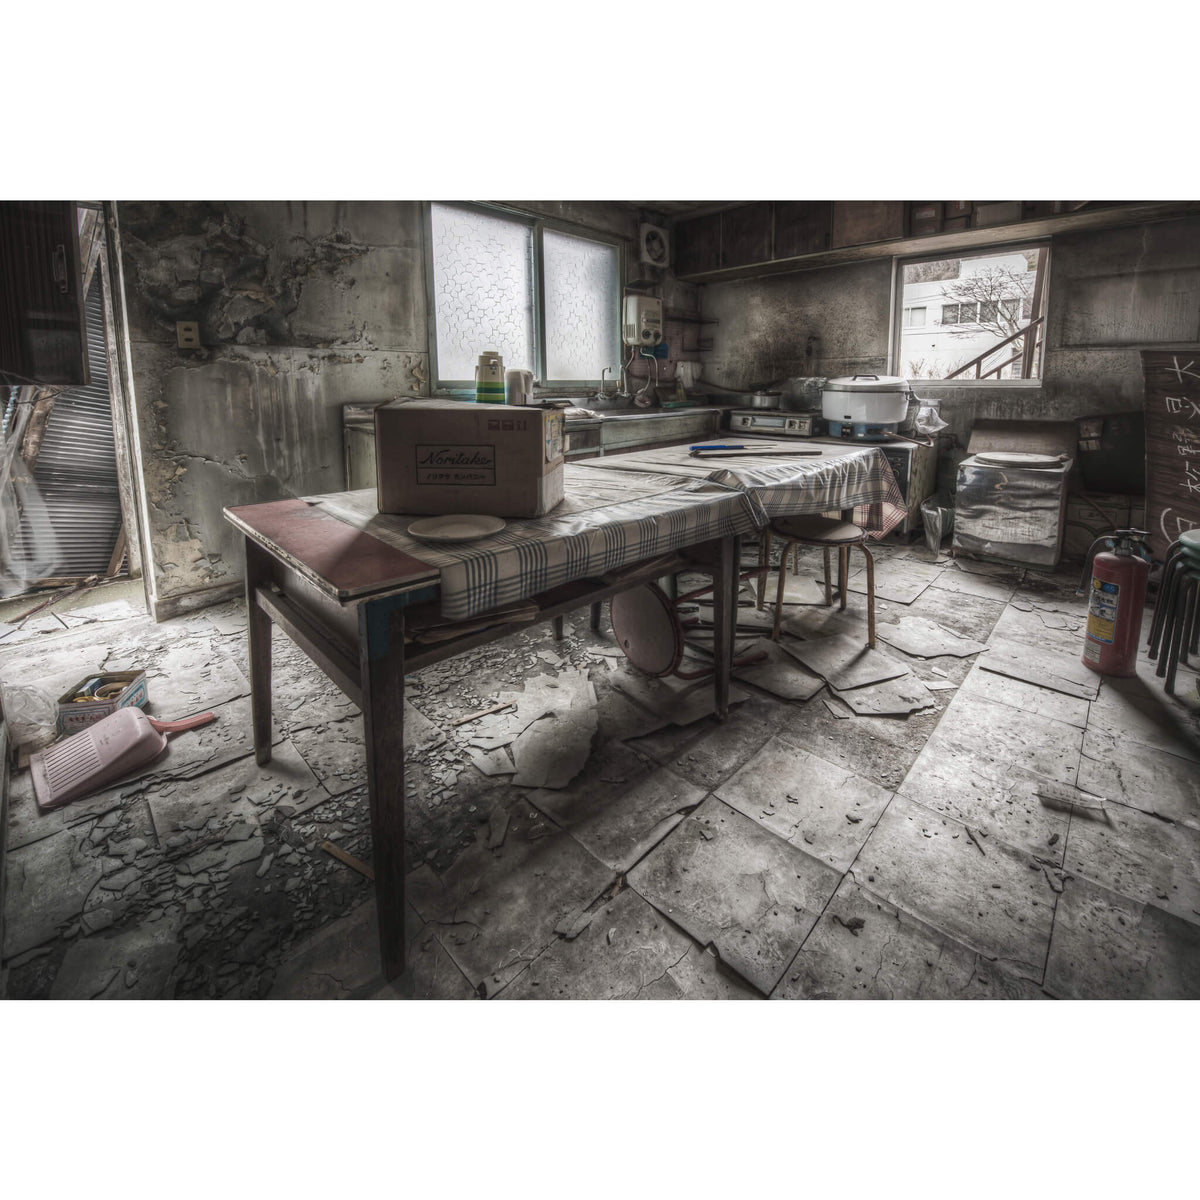 Kitchen And Dining Room | Kuwashima Hospital Fine Art Print - Lost Collective Shop